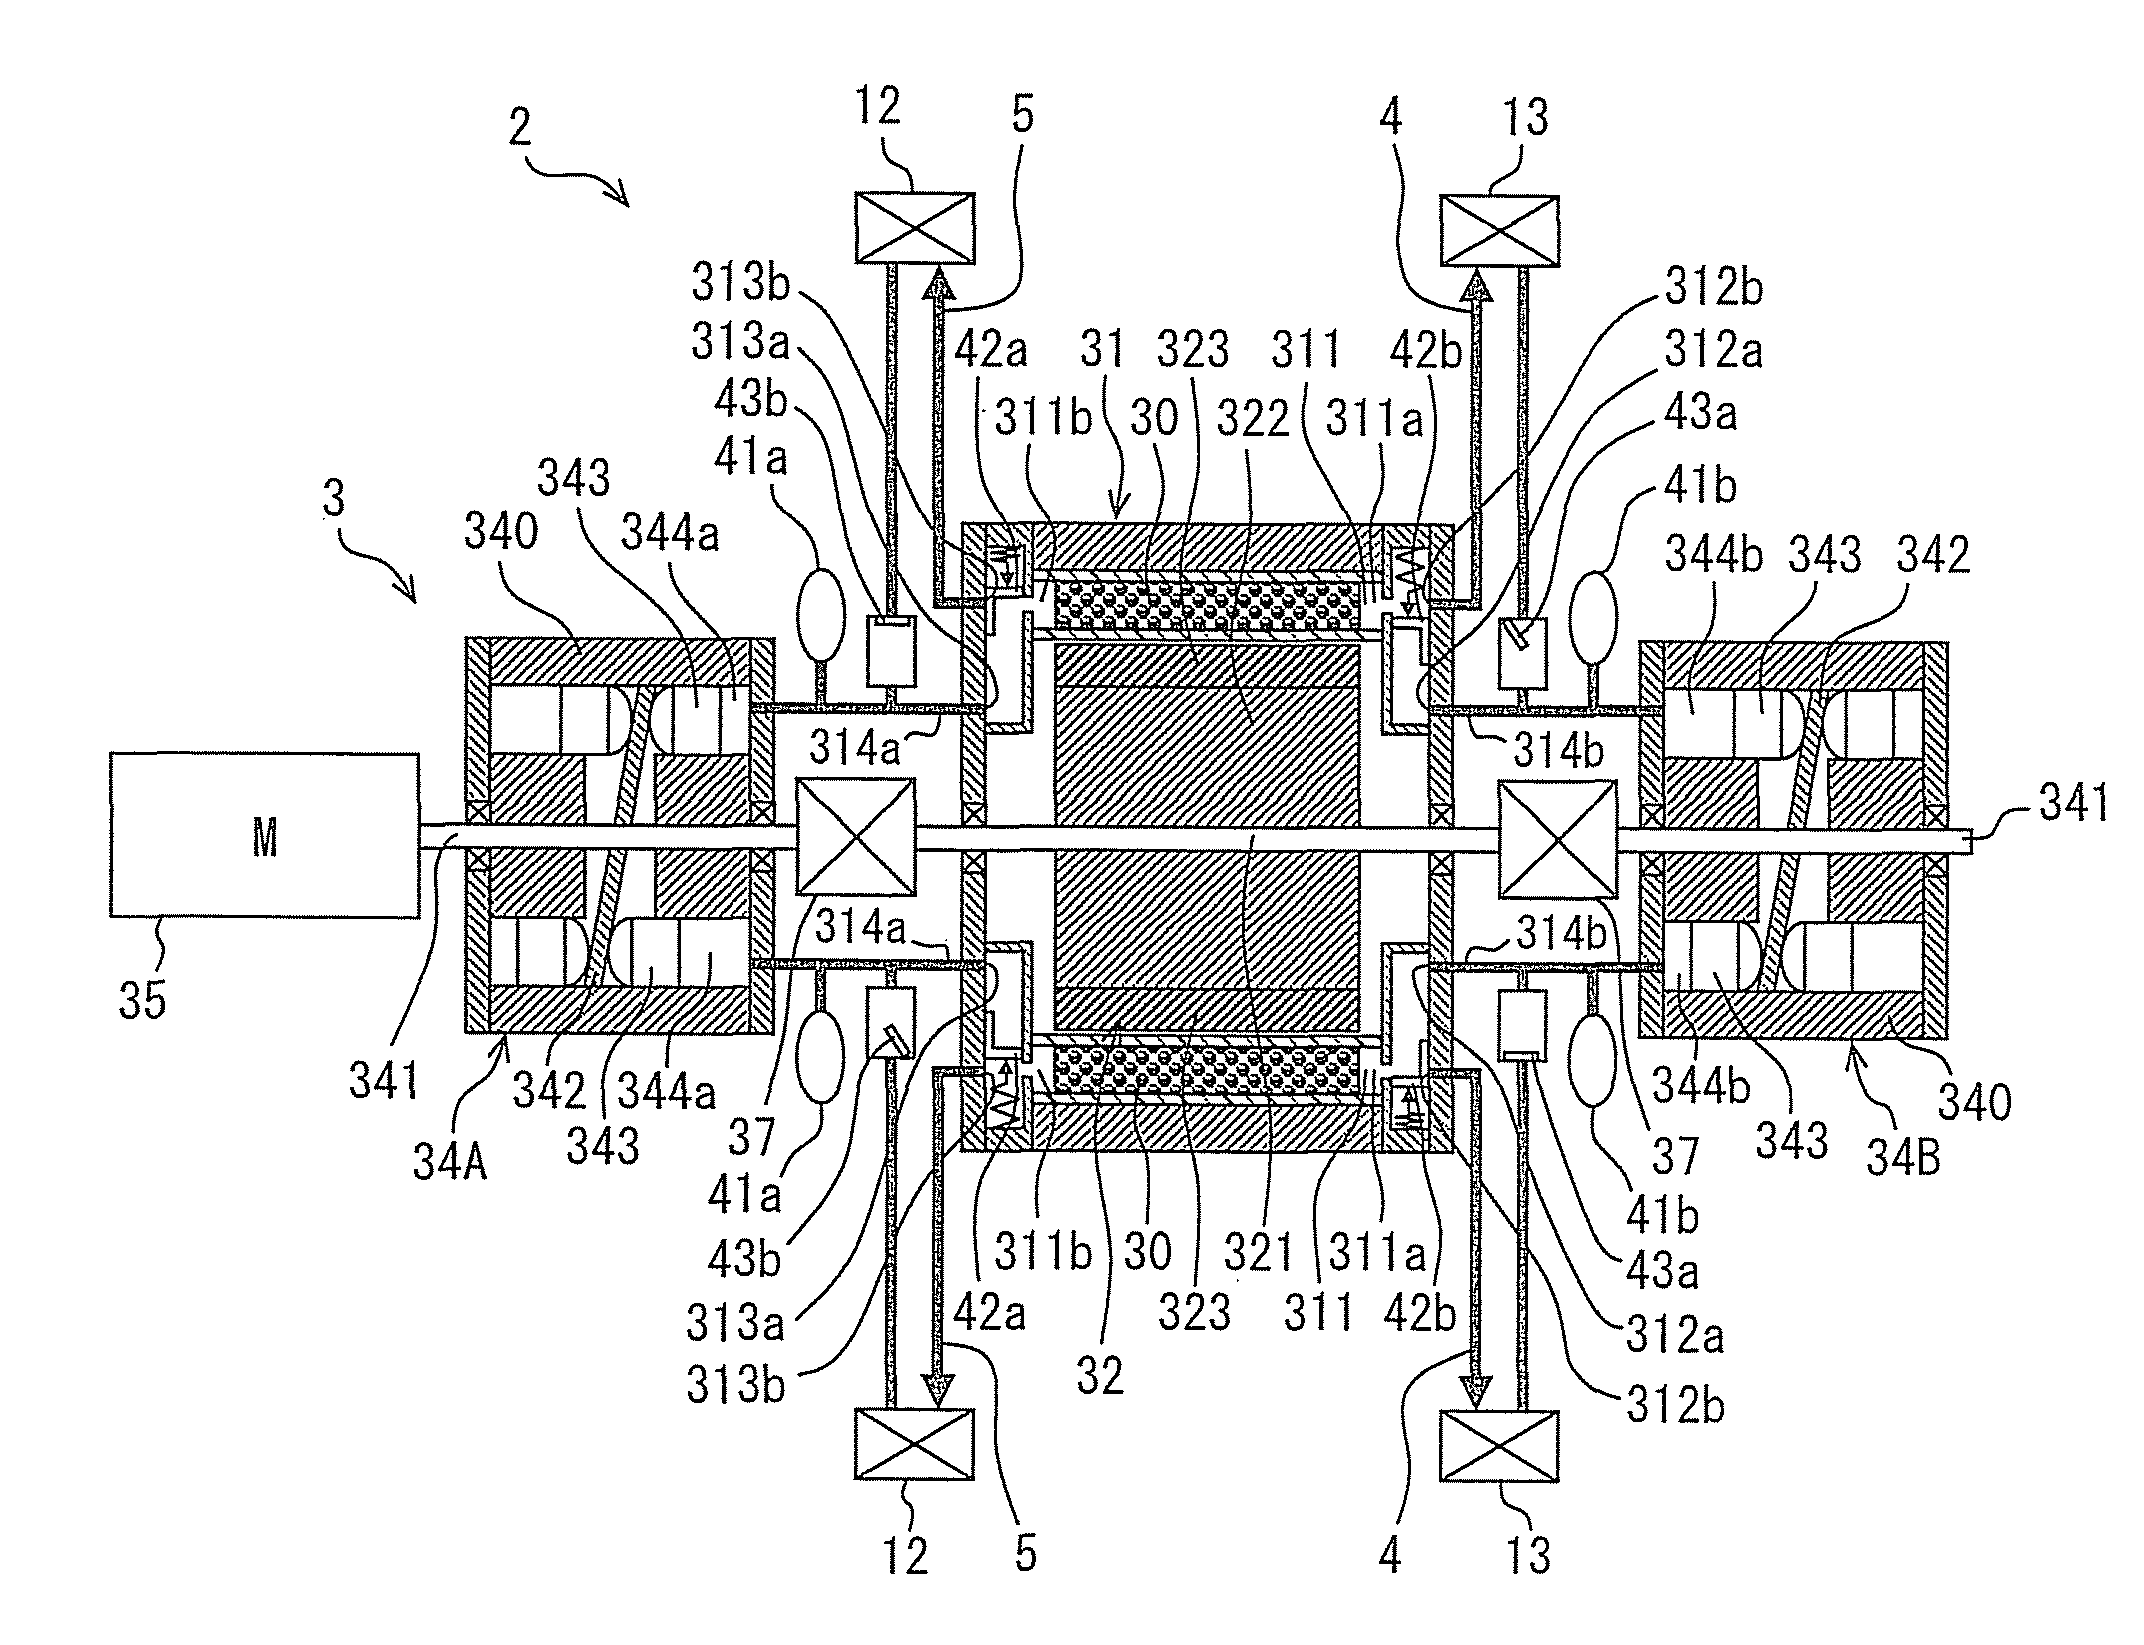 Reciprocating magnetic heat pump apparatus with multiple permanent magnets in different configurations